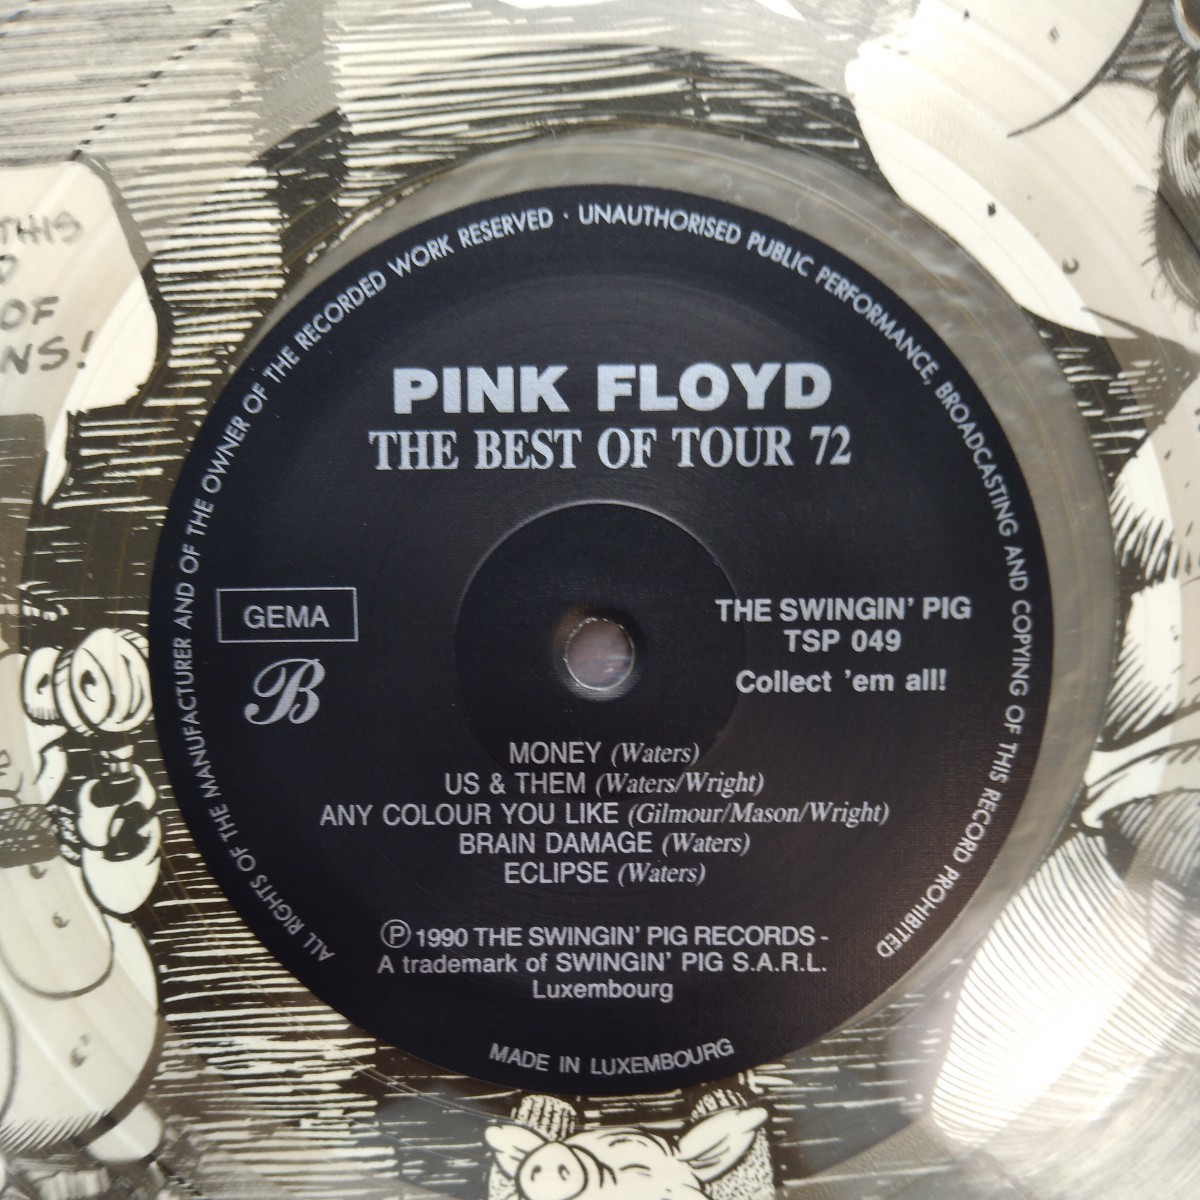 pink floyd the best of tour 72 ピンク・フロイド live analog record vinly レコード アナログ LPの画像6